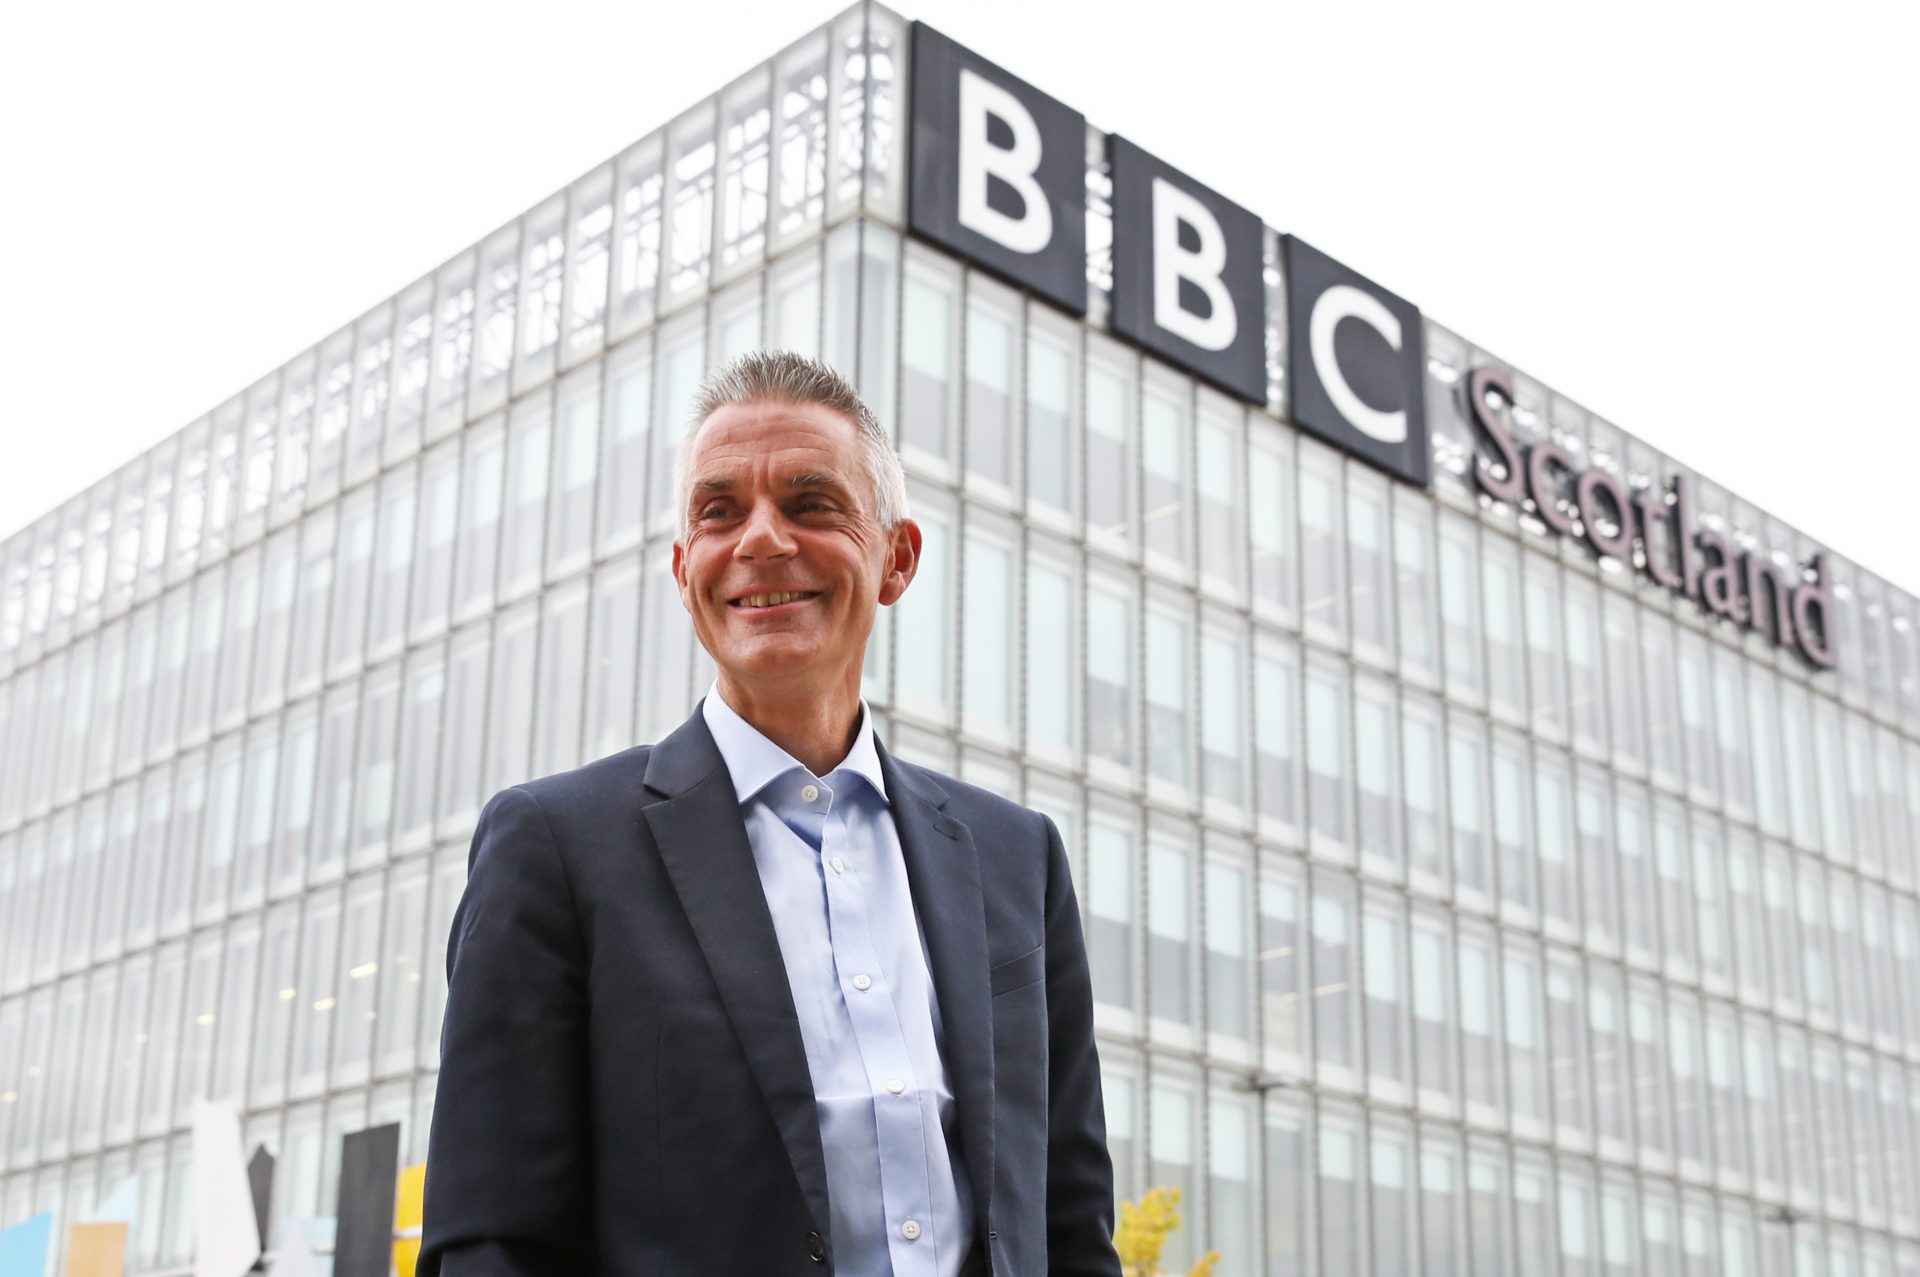 Tim Davie, new Director General of the BBC, arrives at BBC Scotland in Glasgow. Photo:  Andrew Milligan/PA Archive/PA Images.